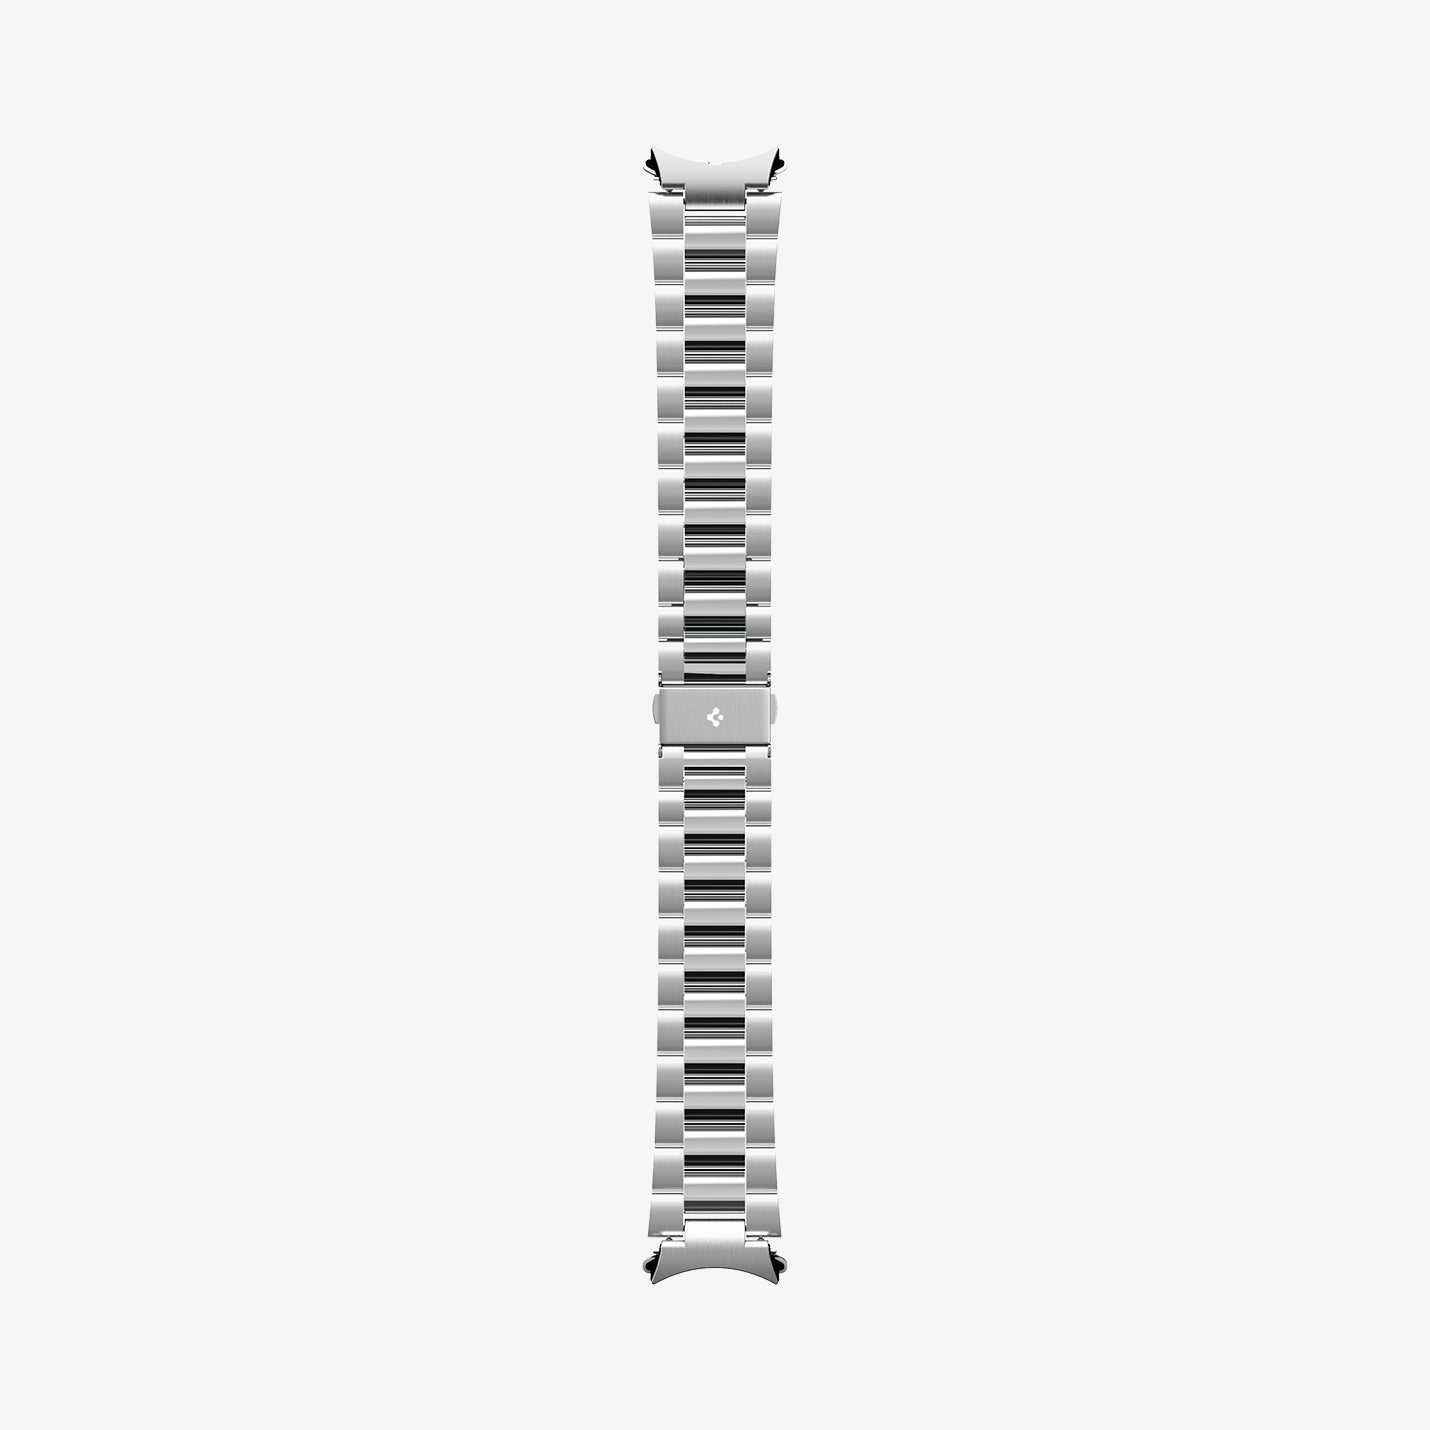 AMP06489 - Watch 6 Classic (47mm) Modern Fit 316L Band in Silver showing the sides of the watch strap laid out flat